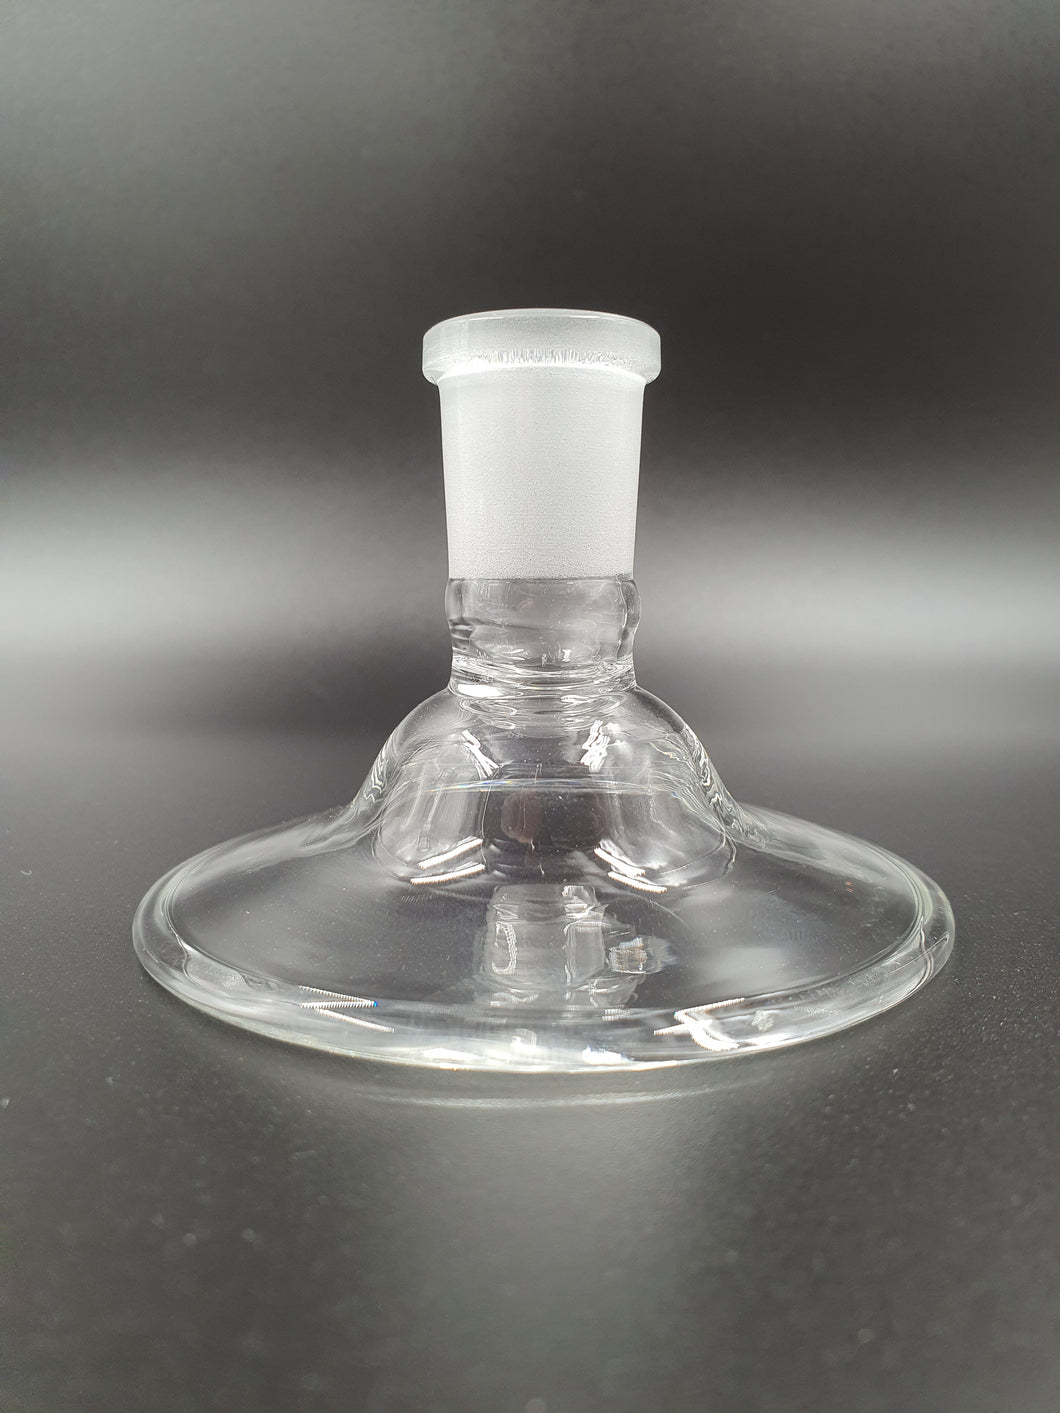 Wide Base 18mm Female Stand for Elev8r